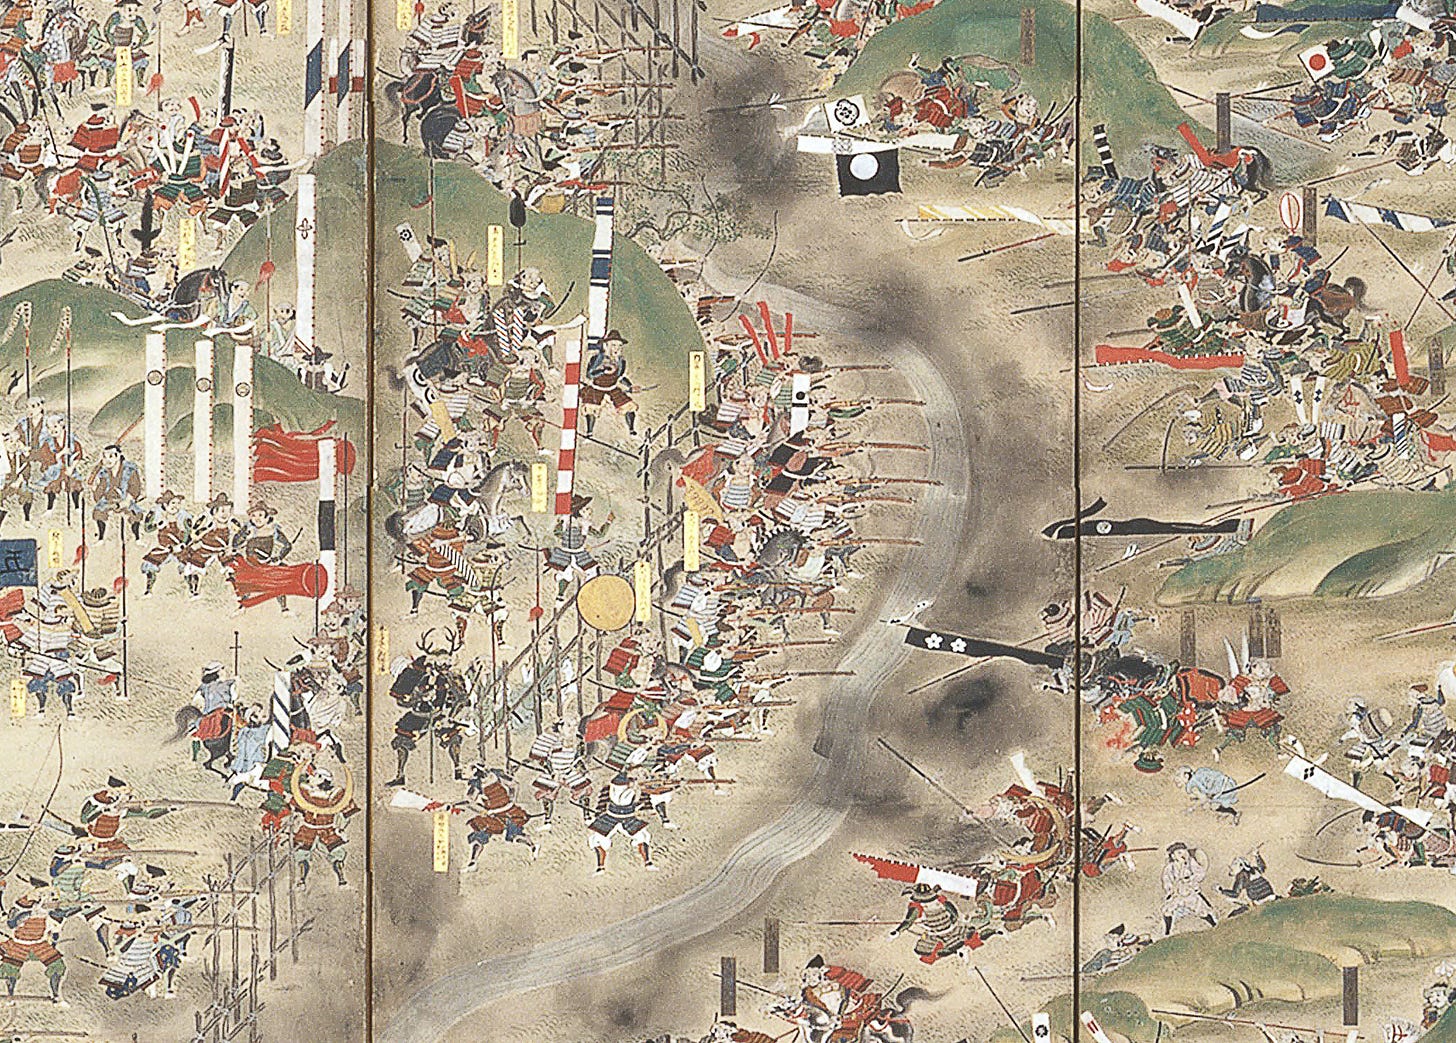 Bringing spears to a gun fight: the battle of Nagashino. Courtesy Wikimedia Commons.